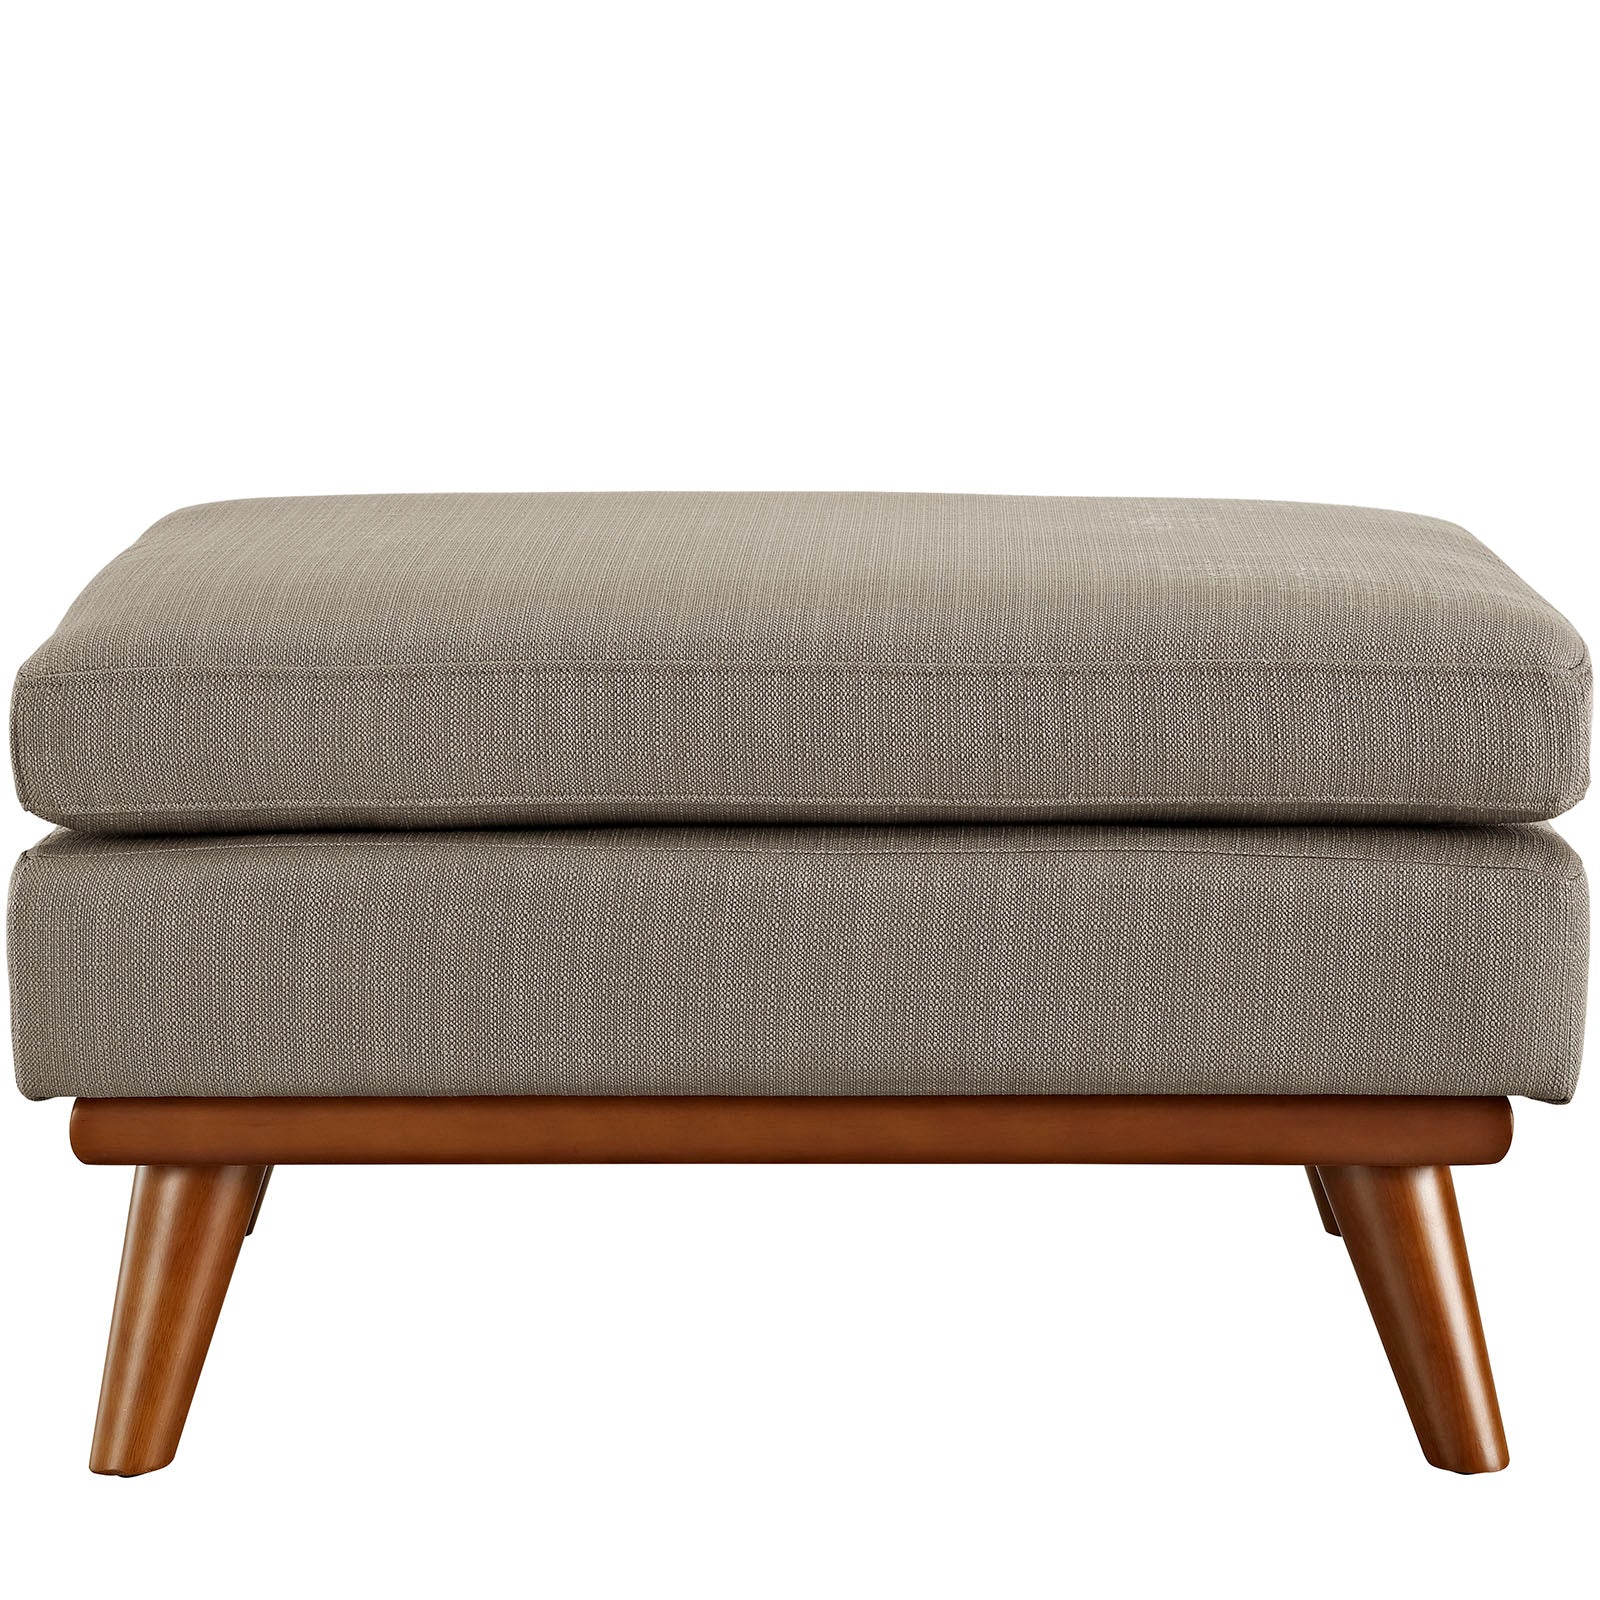 Engage Upholstered Fabric Ottoman - East Shore Modern Home Furnishings